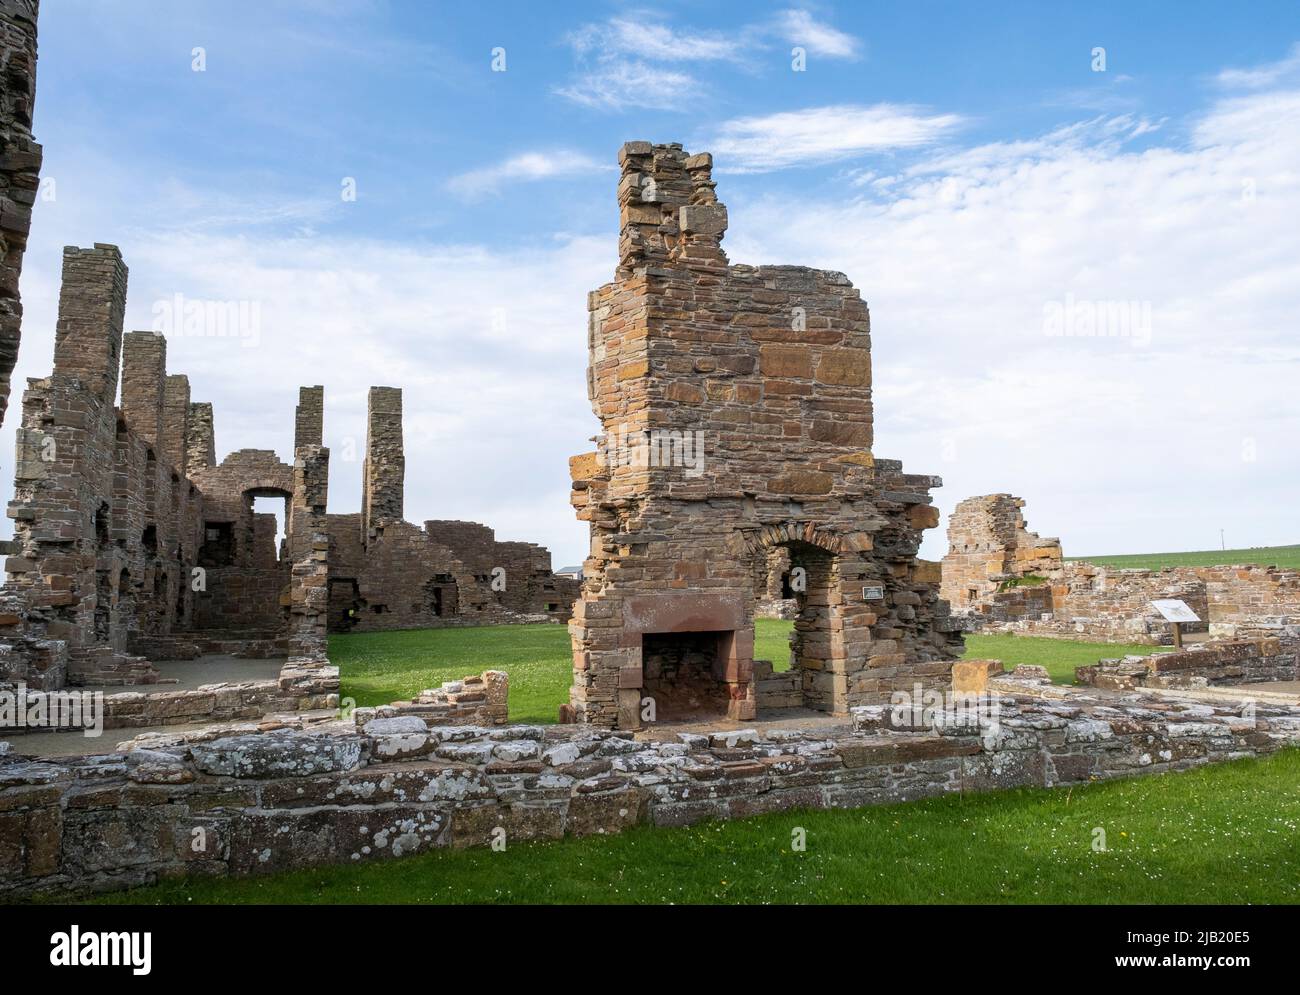 Ruins of the Earl's Palace, a 16th century castle in Birsay, Mainland, Orkney, Scotland, UK Stock Photo